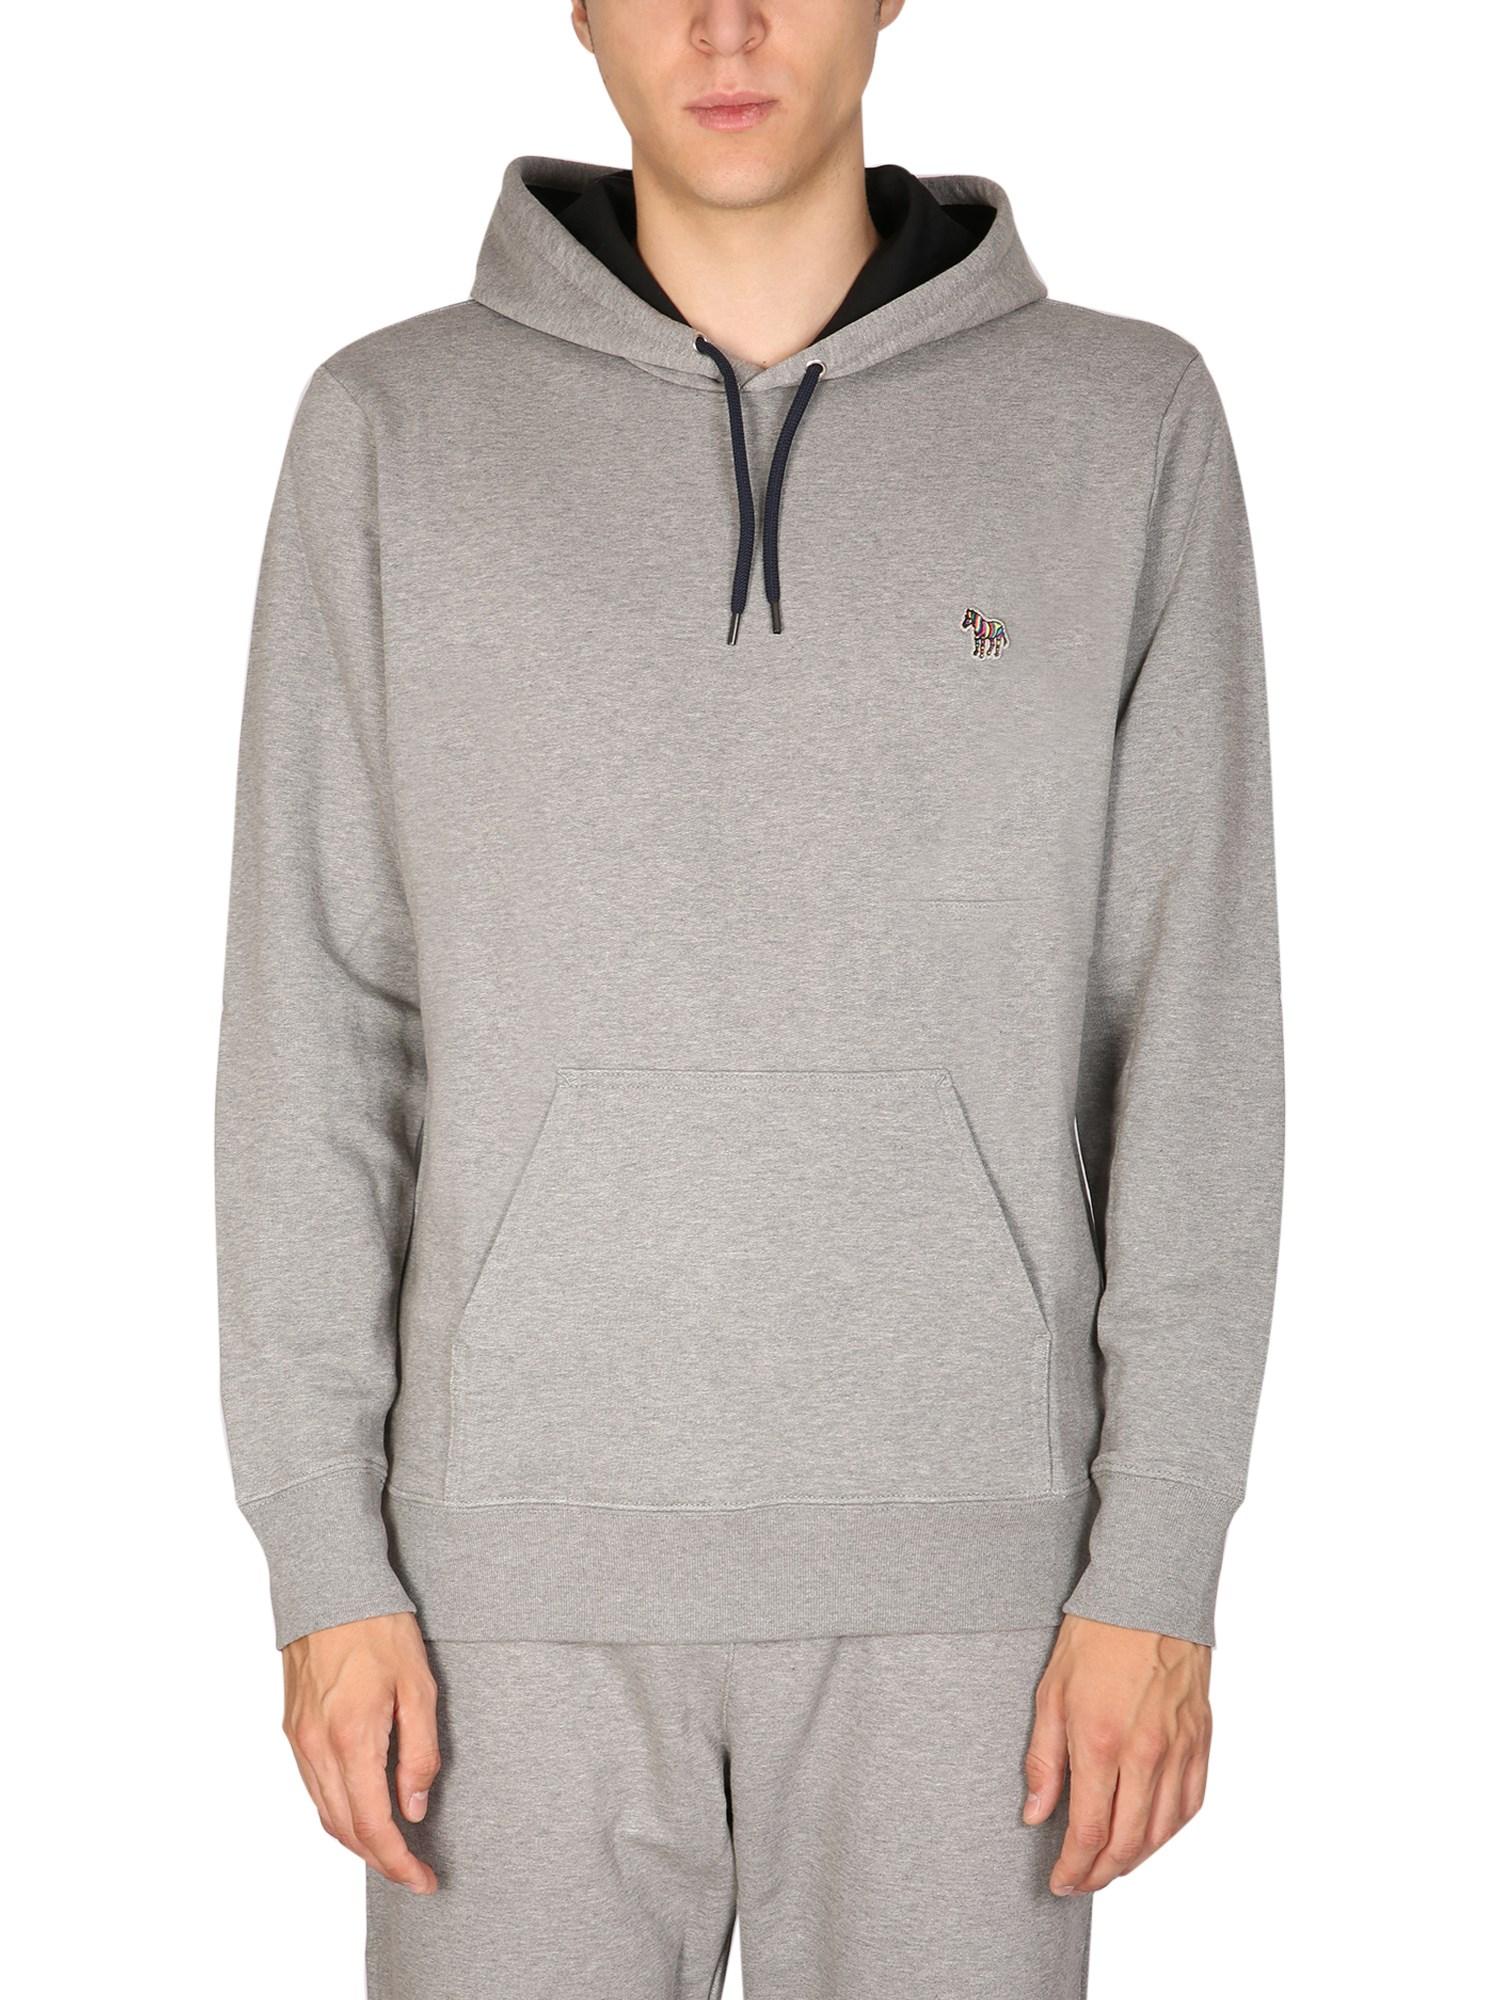 PS by Paul Smith Cotton Sweatshirt With Zebra Patch in Grey (Gray) for Men  - Save 46% | Lyst